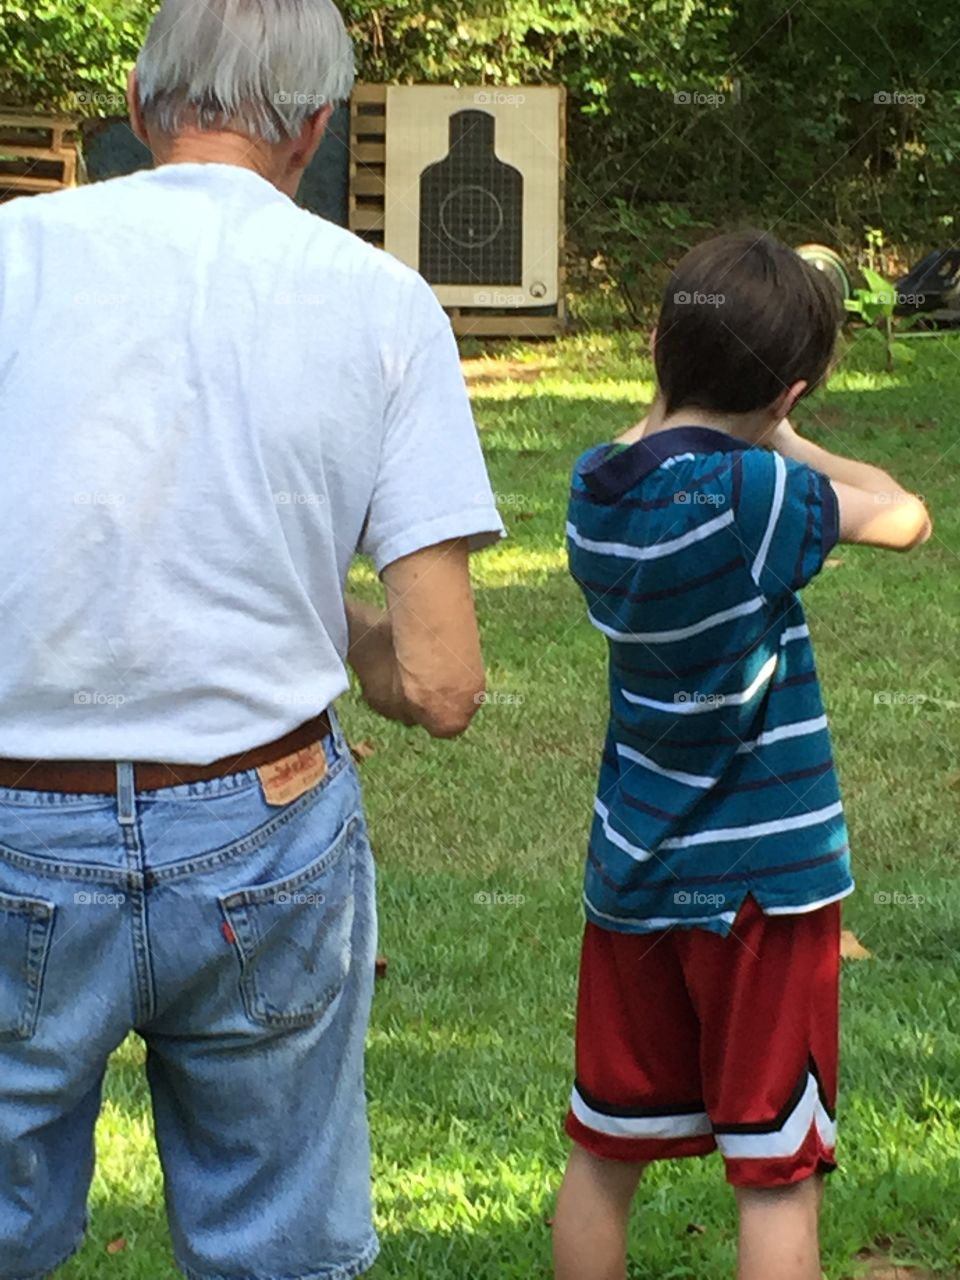 Grandpa and his young grandson, practicing shooting at a paper target.